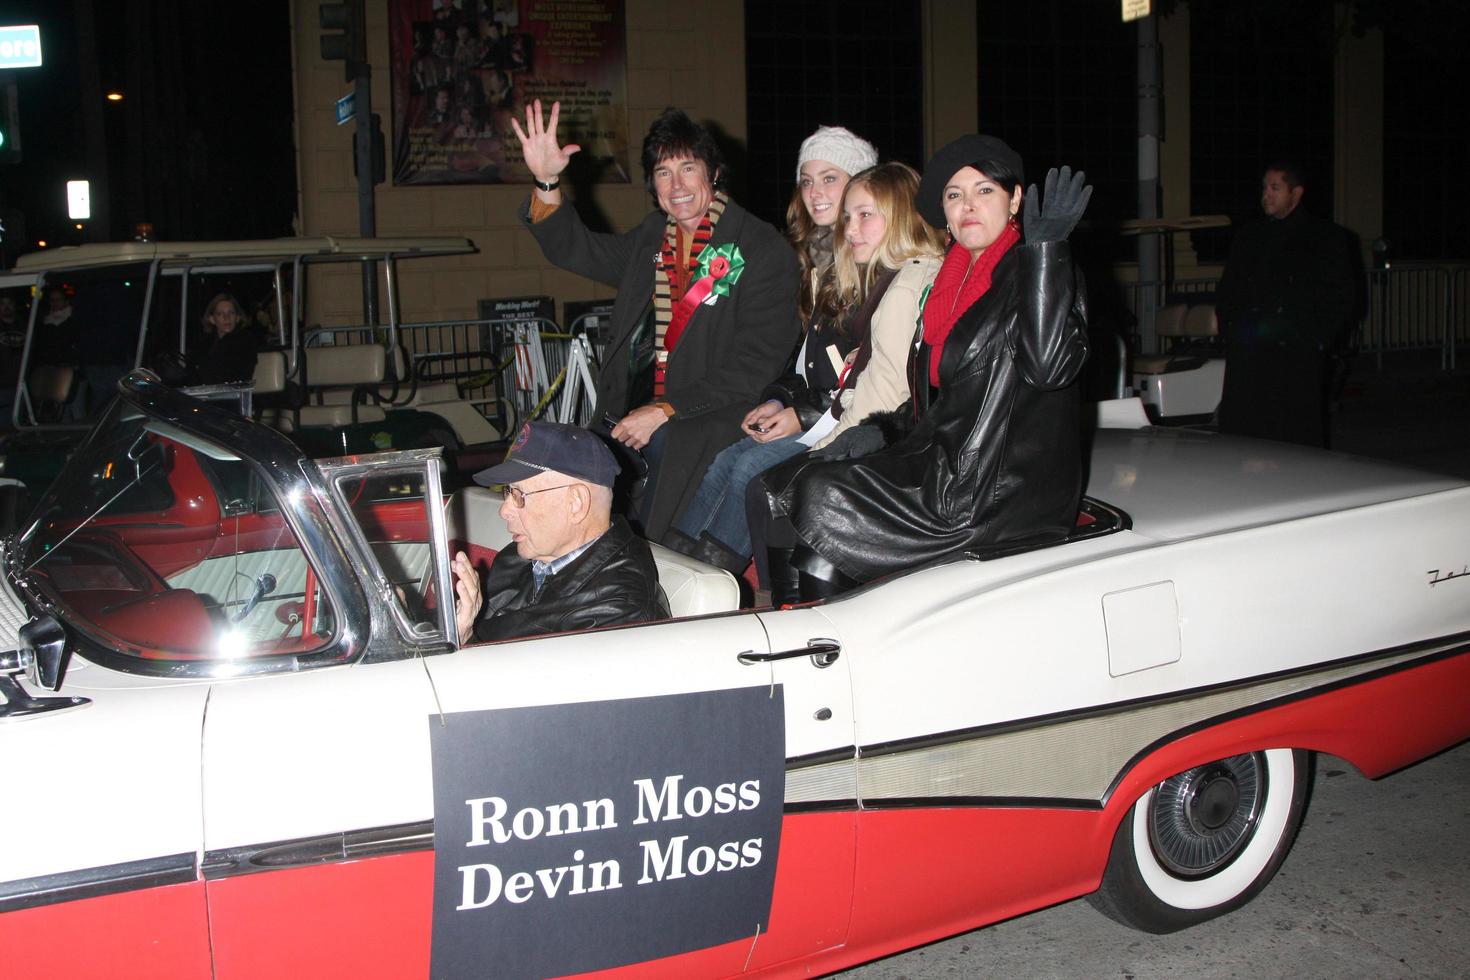 LOS ANGELES, NOV 28 -  Ronn Moss, Wife Devin, daughters arrives at the 2010 Hollywood Christmas Parade at Hollywood Boulevard on November 28, 2010 in Los Angeles, CA photo